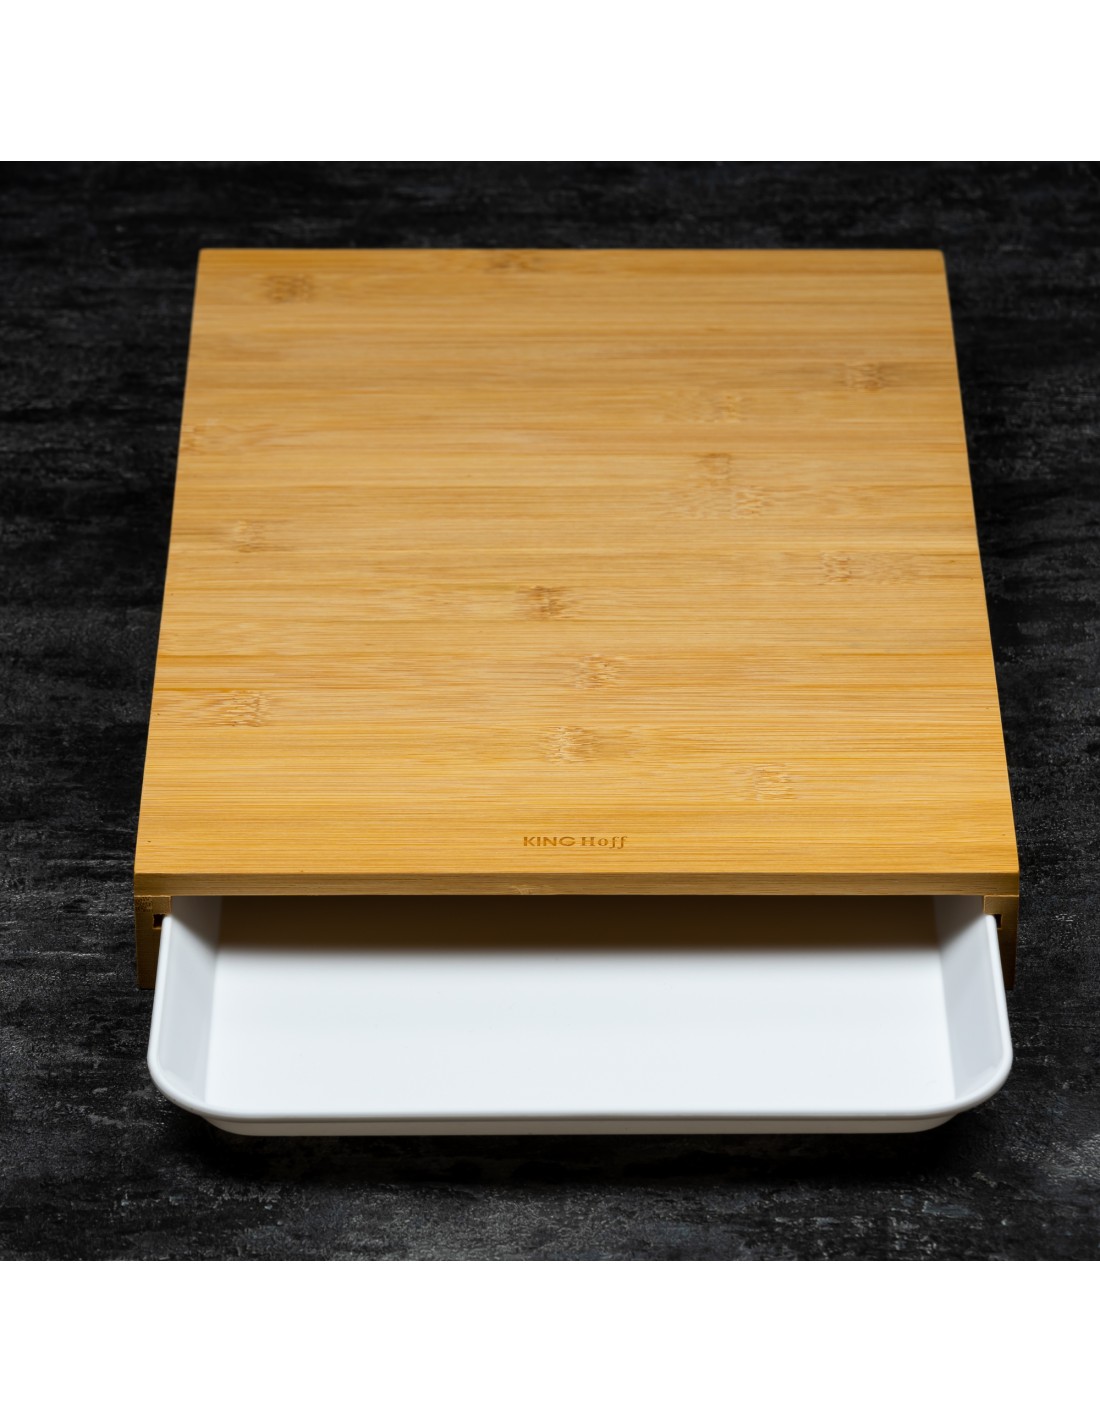 https://kinghoff.com/4542-thickbox_default/bamboo-chopping-board-with-plastic-tray.jpg